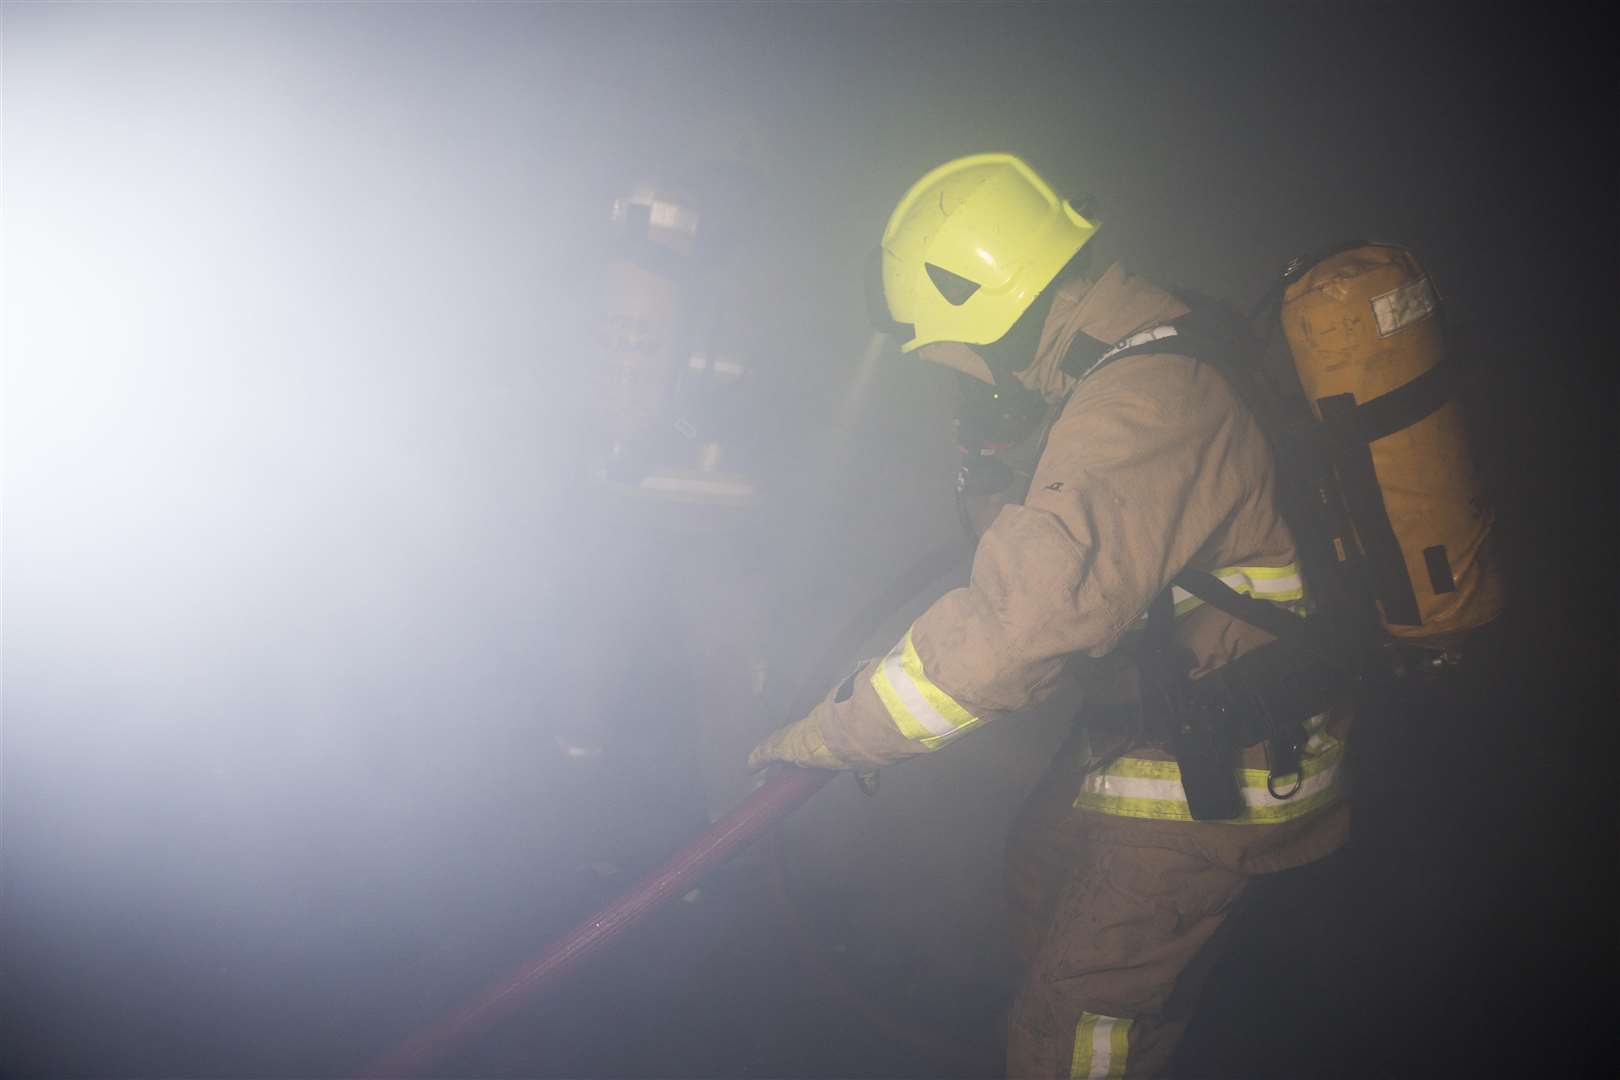 Fire crews were called to the blaze in the roof. Stock image